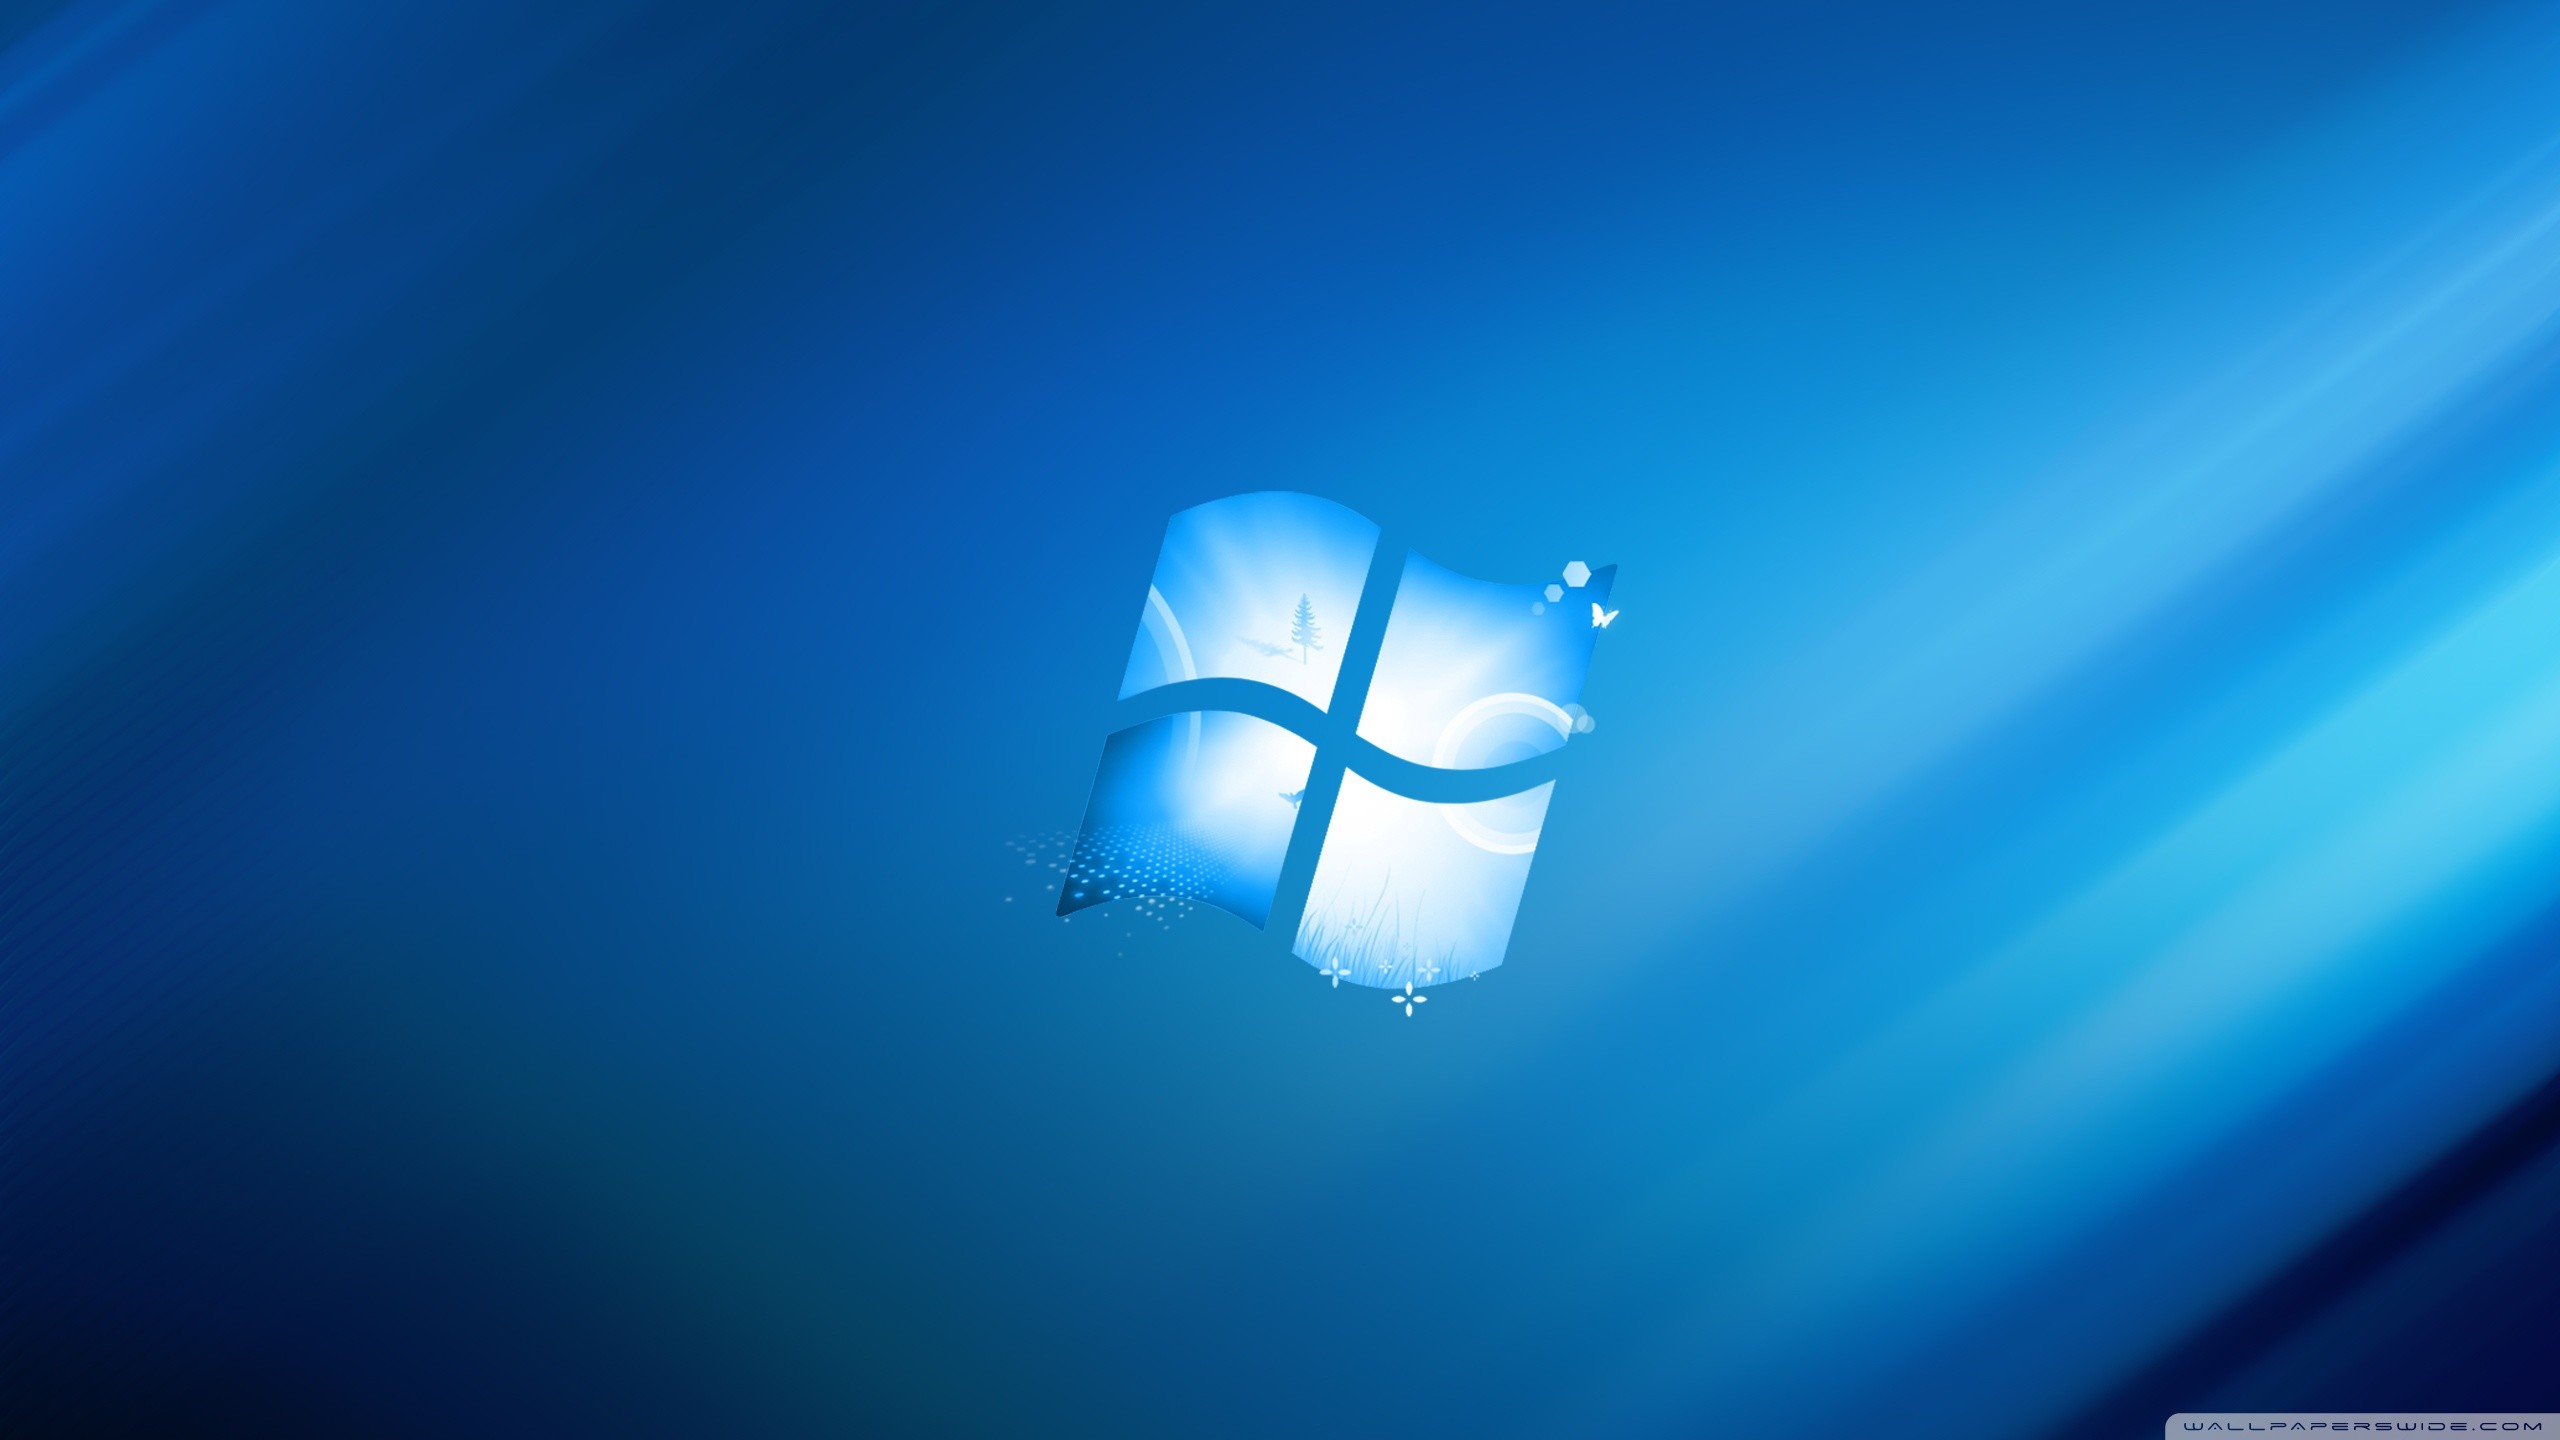 2560x1440 Windows 8 blue theme wallpapers and images - wallpapers, pictures .